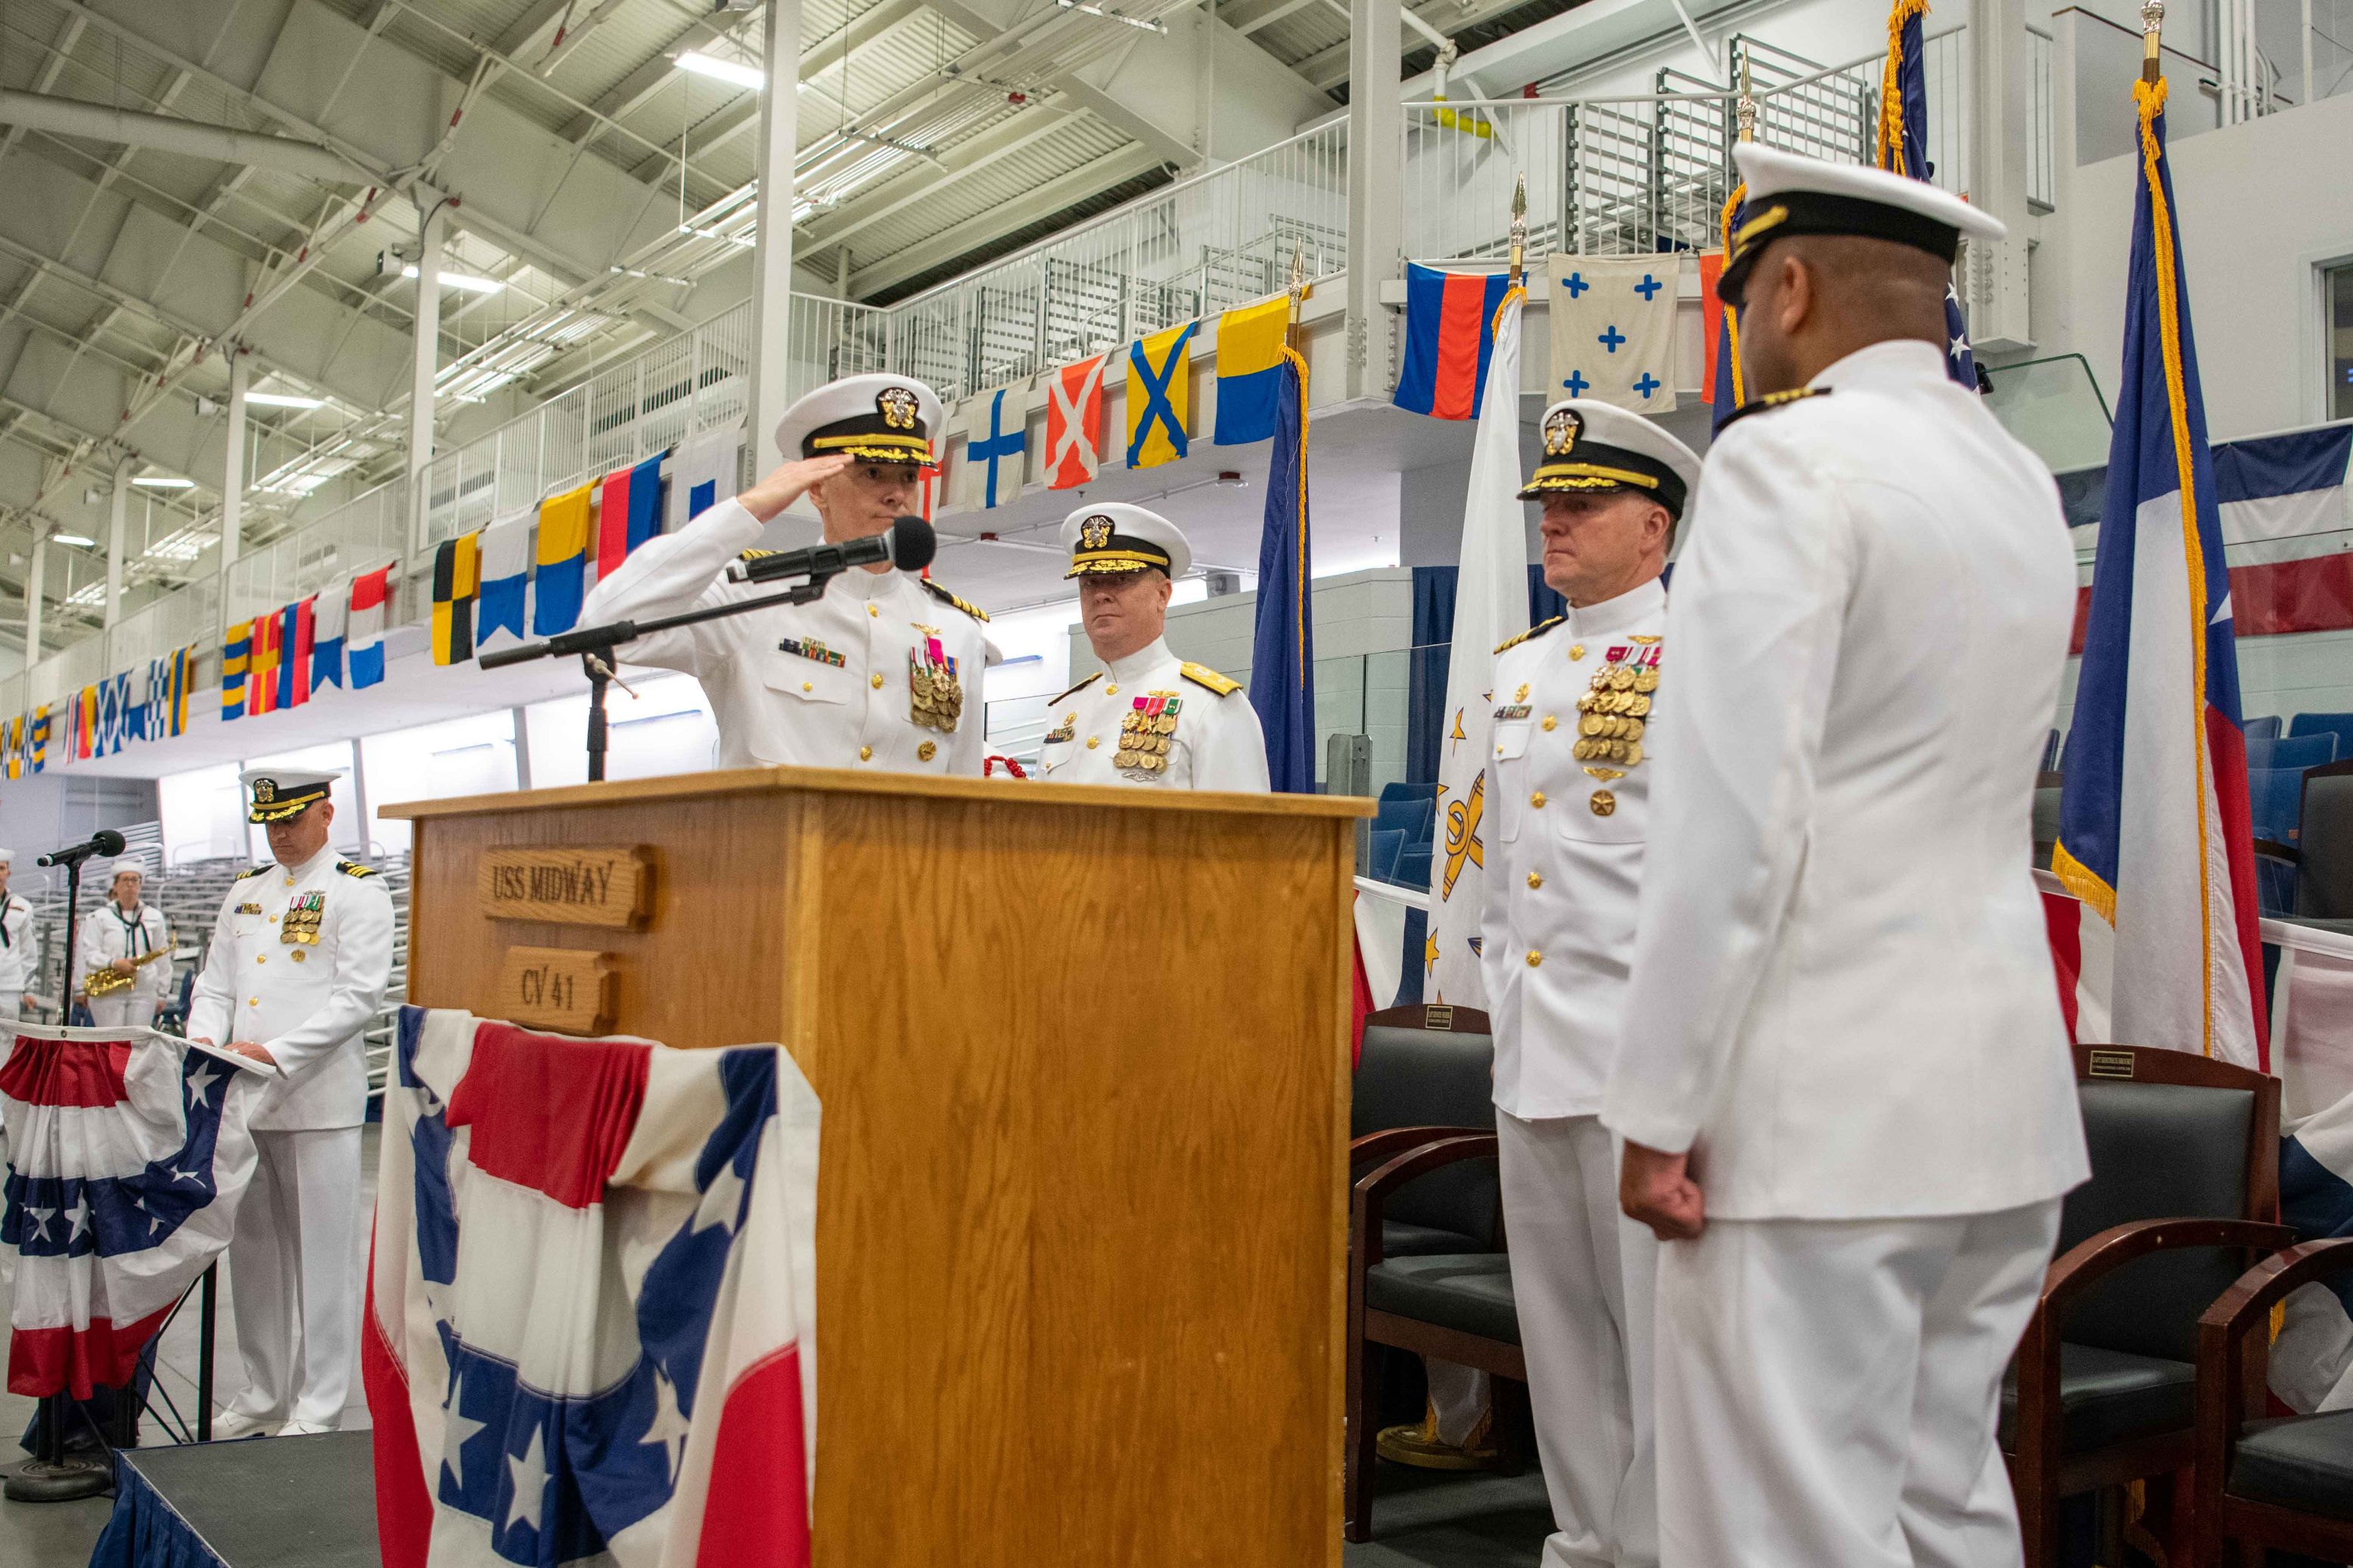 Capt. Kertreck Brooks is relieved by Capt. Kenneth Froberg as commanding officer of U.S. Navy Recruit Training Command during a change of command ceremony at Midway Ceremonial Drill Hall, Great Lakes, Illinois, July 18, 2023. More than 40,000 recruits train annually at the Navy’s only boot camp. (U.S. Navy photo by Mass Communication Specialist 1st Class Stephane Belcher)